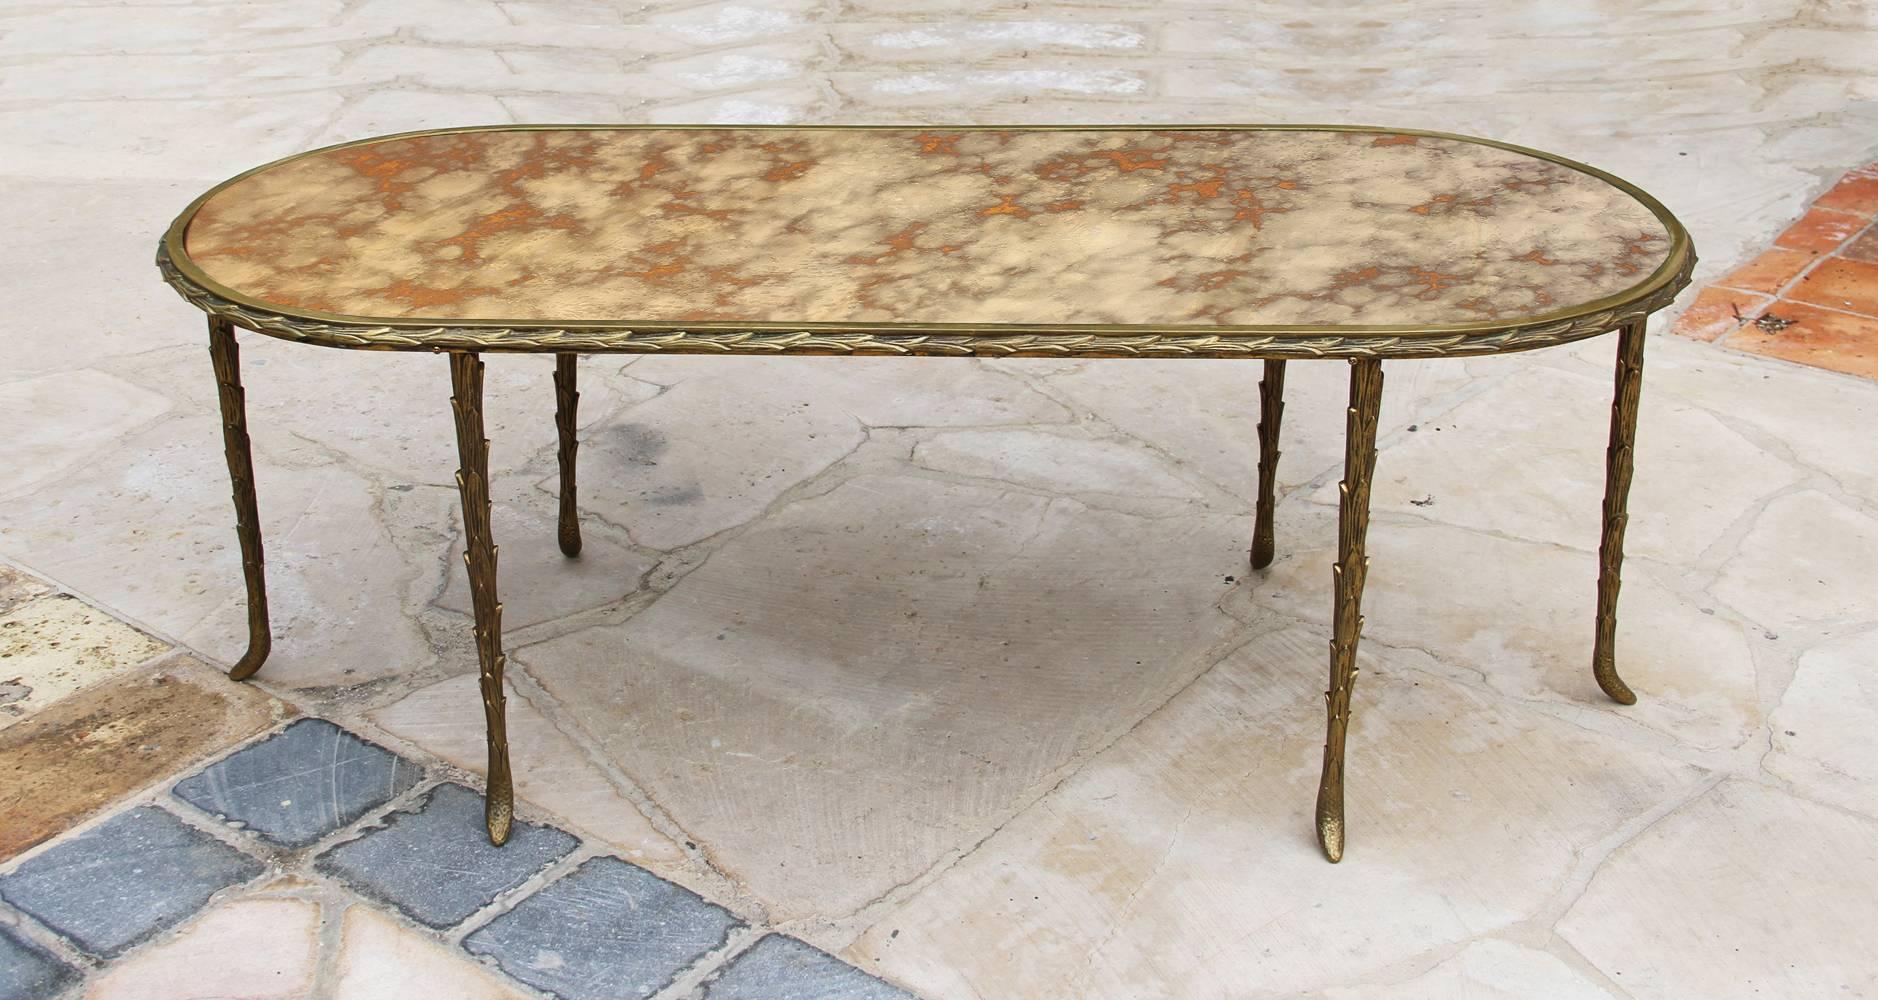 This elegant Baguès coffee table is in its original condition, it has a gilt bronze, palm trunk motif frame and a mirrored top. The feet on each leg have a ram Horn shape. The bronze has a beautiful natural patina and the top is with an amazing